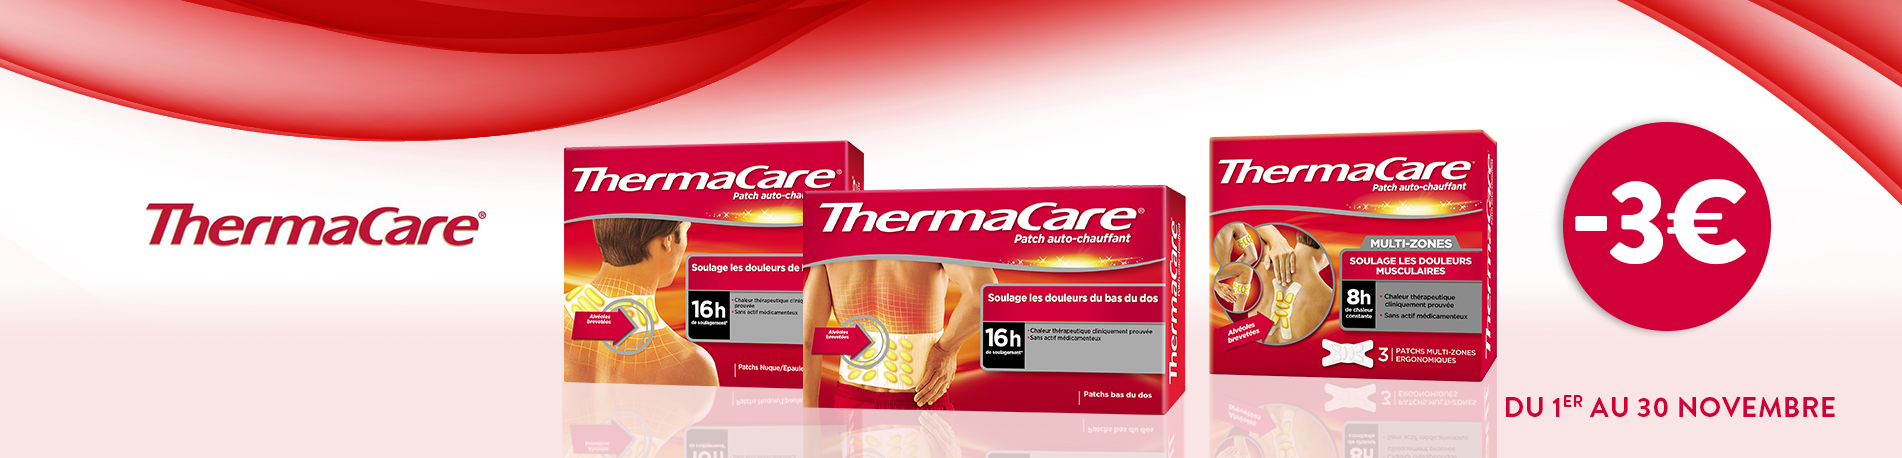 Promotion Thermacare